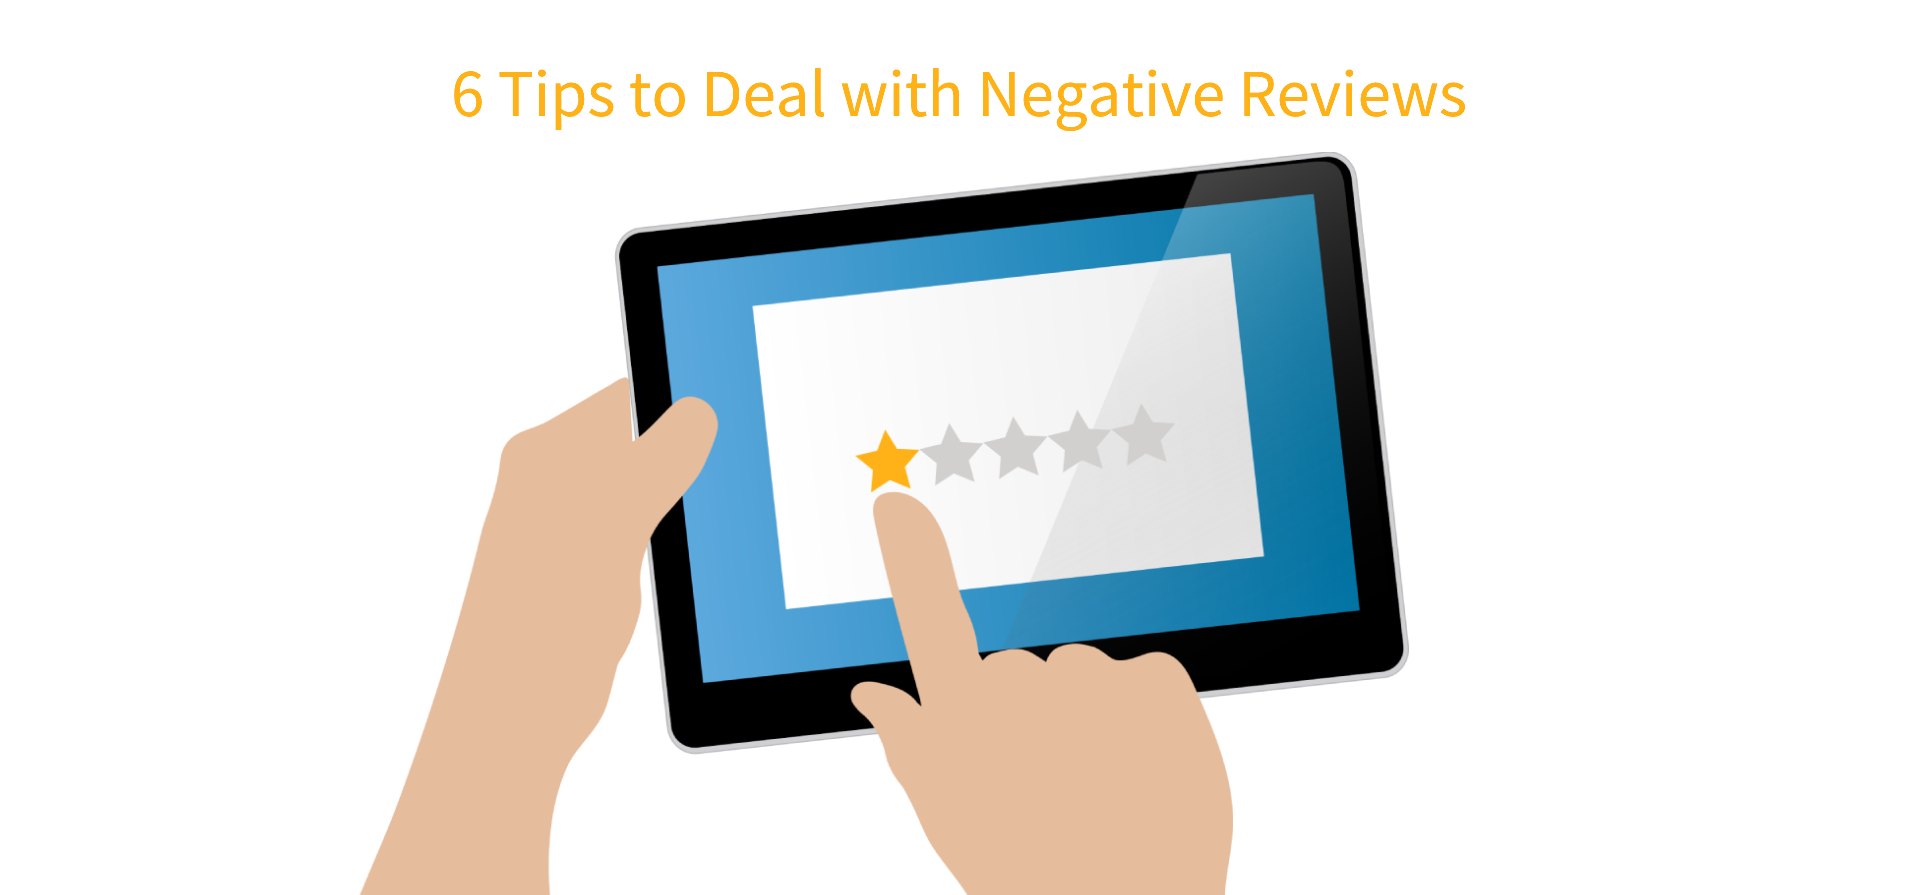 6 Tips to Deal with Negative Reviews